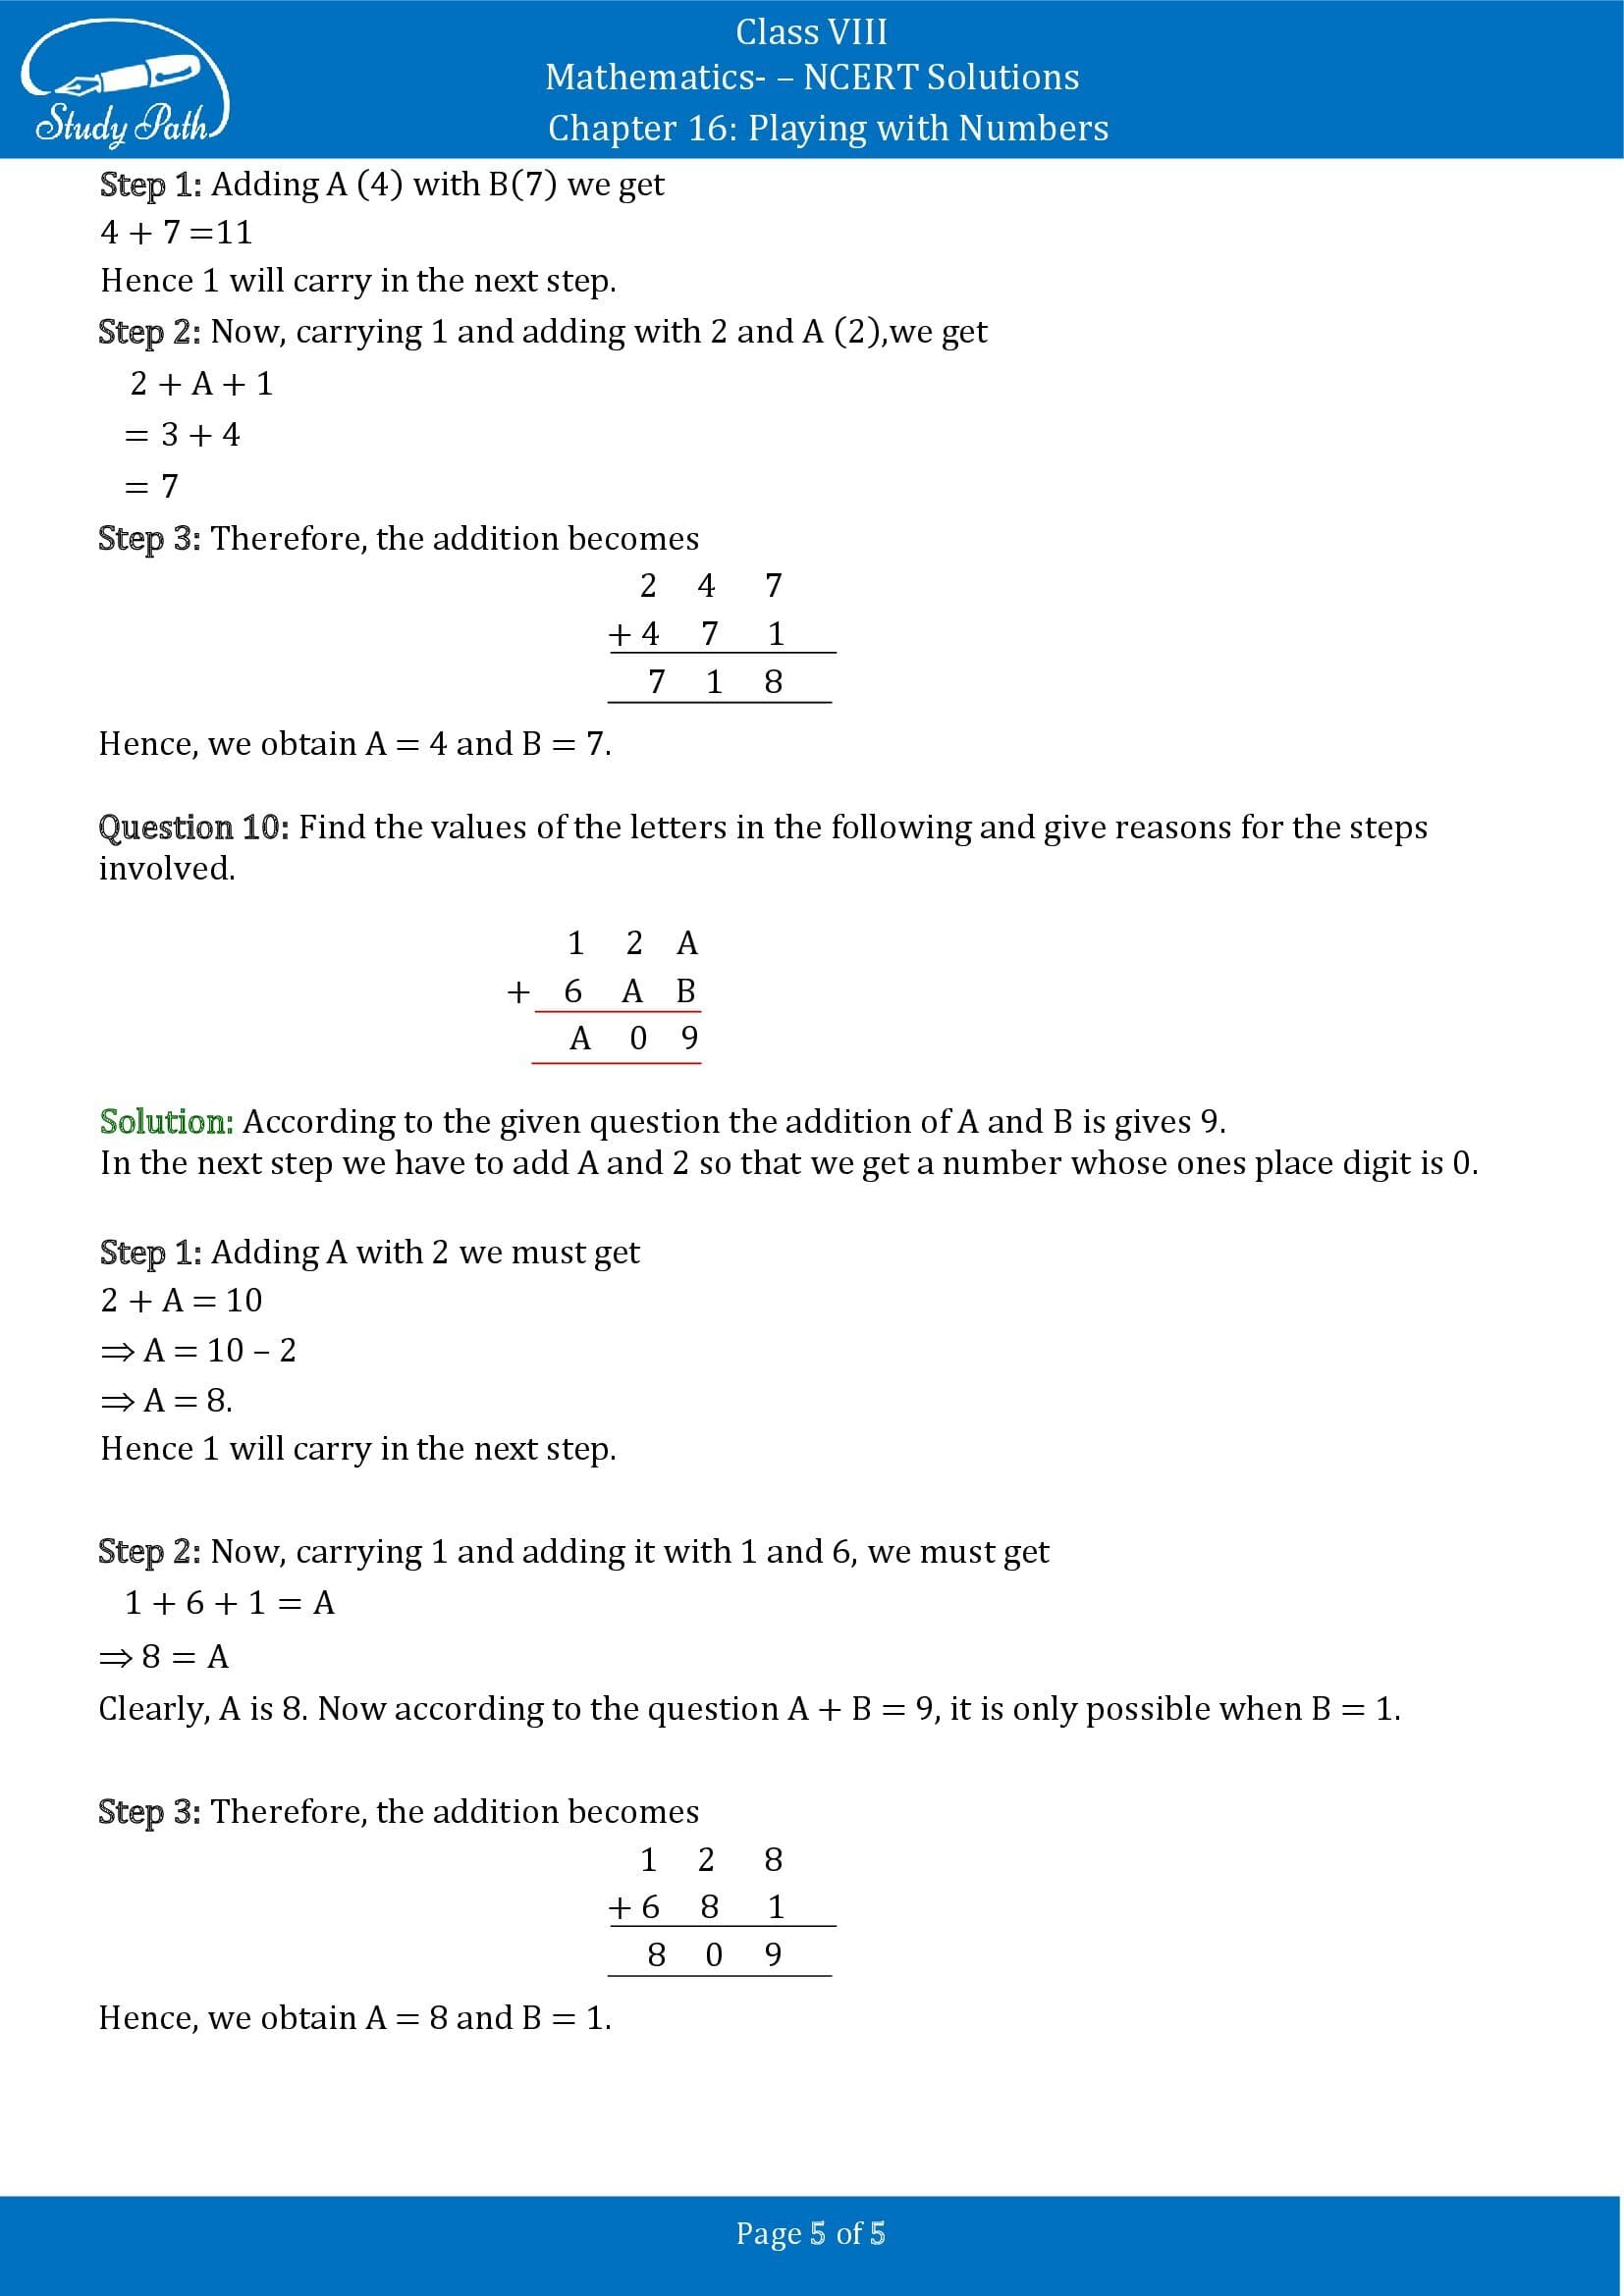 NCERT Solutions for Class 8 Maths Chapter 16 Playing with Numbers Exercise 16.1 00005